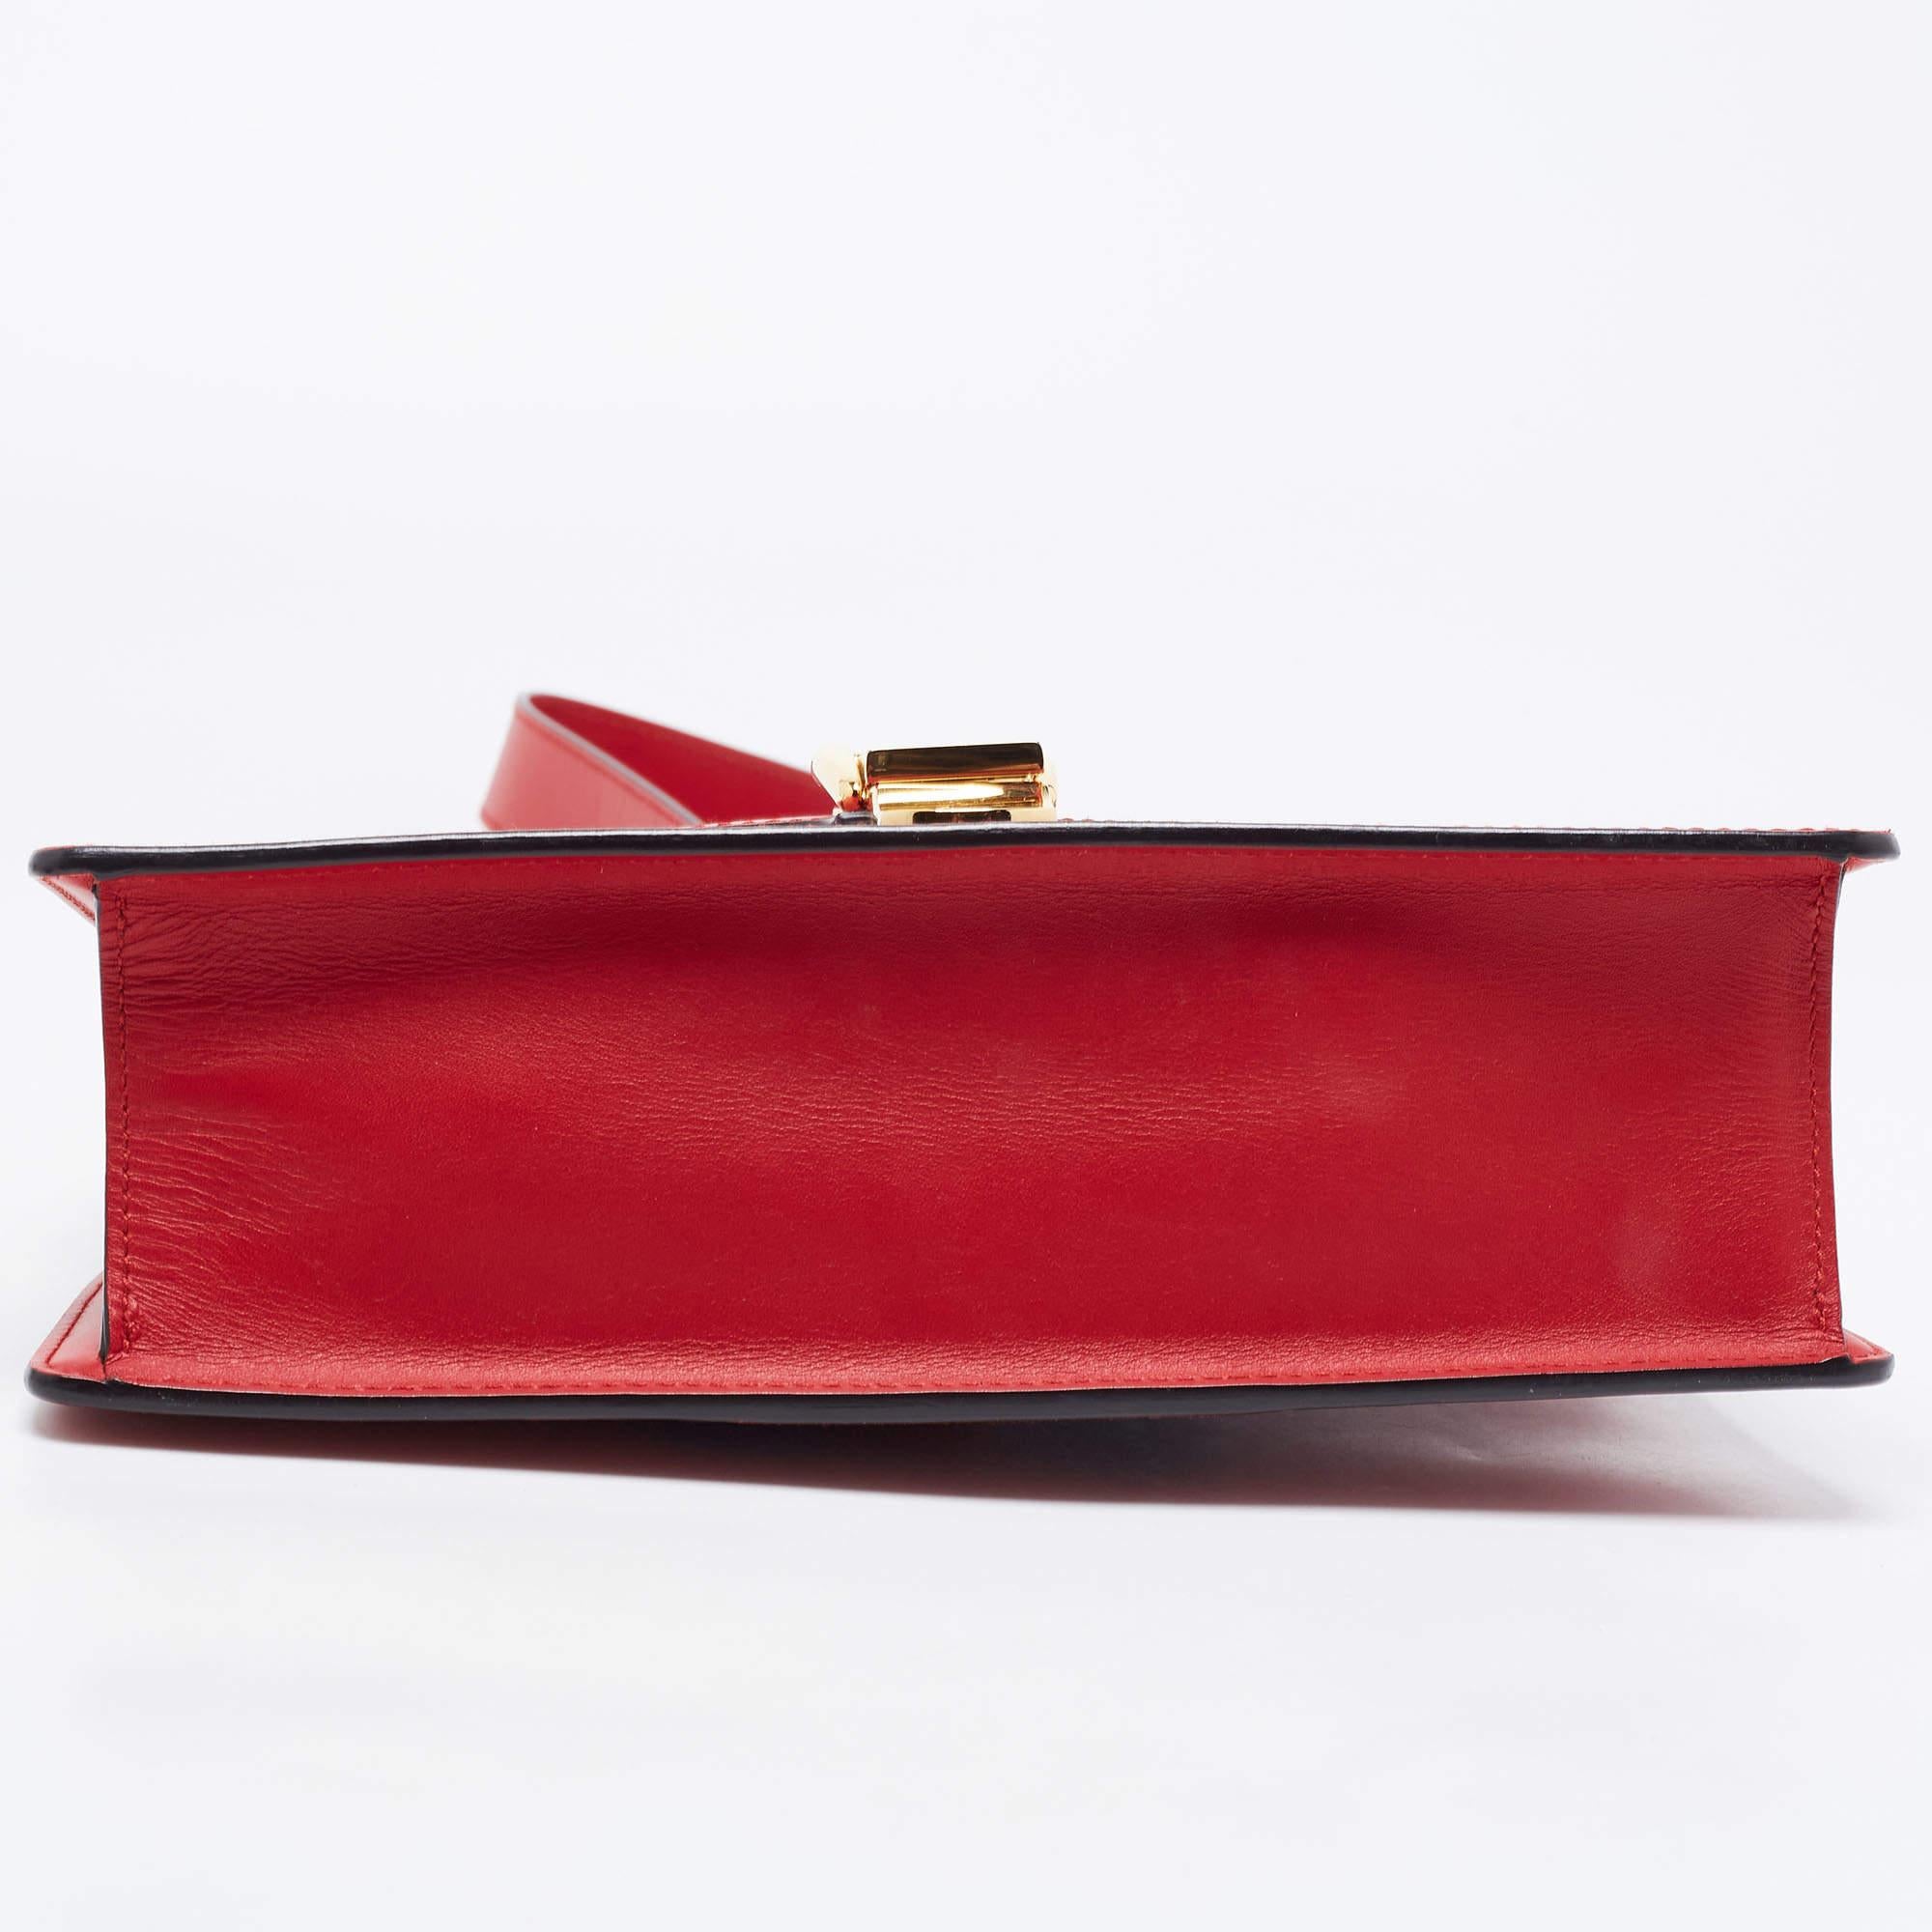 Gucci Red Leather Small Sylvie Web Shoulder Bag 5